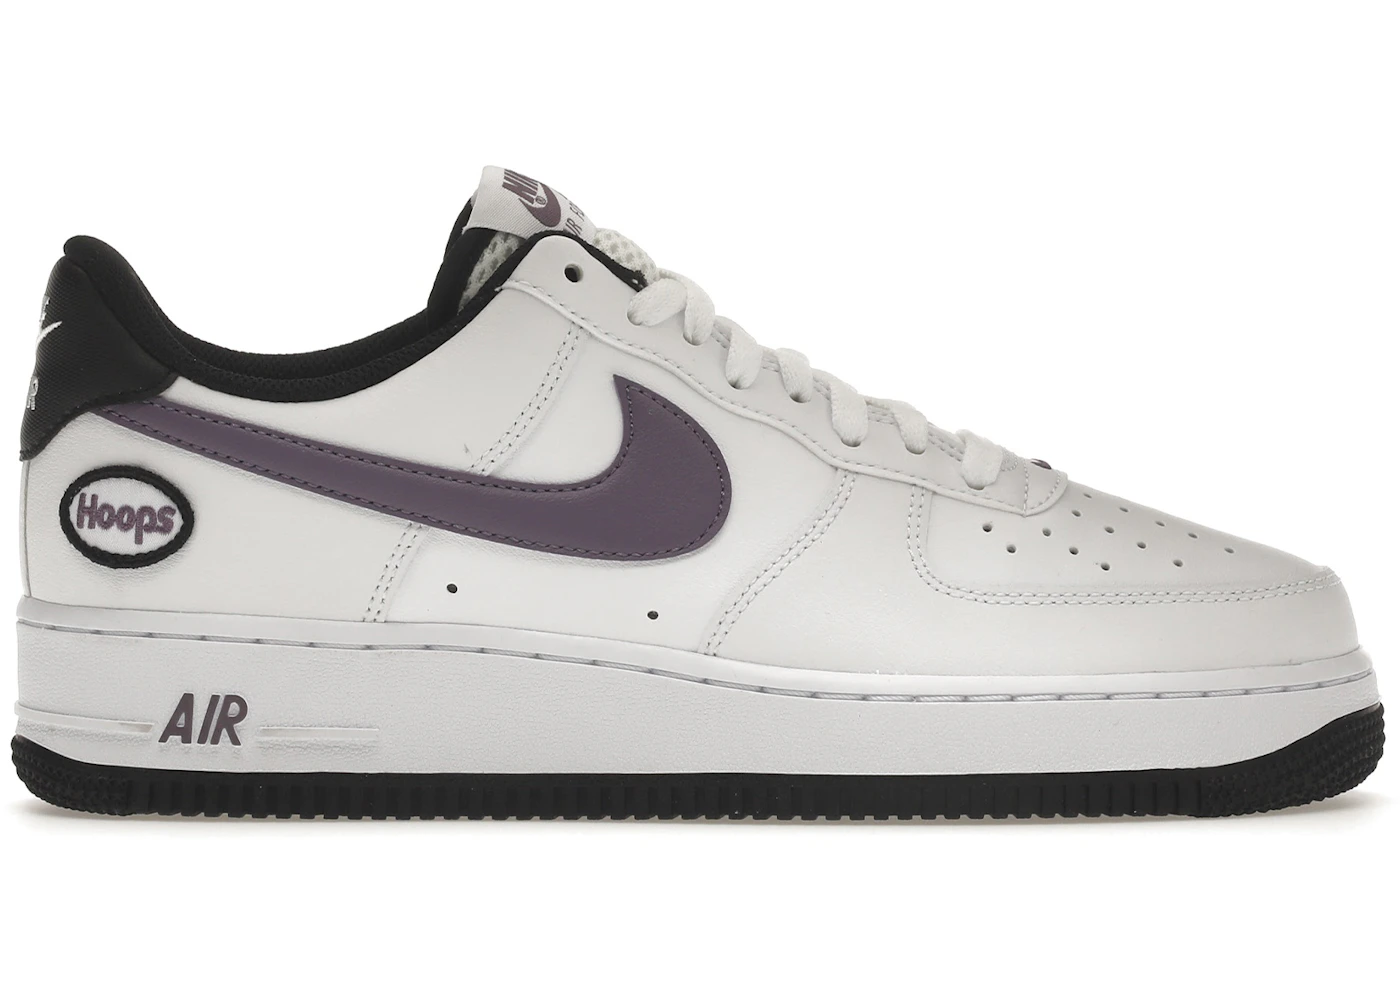 Nike Men's Air Force 1 '07 LV8 Hoops Casual Shoes